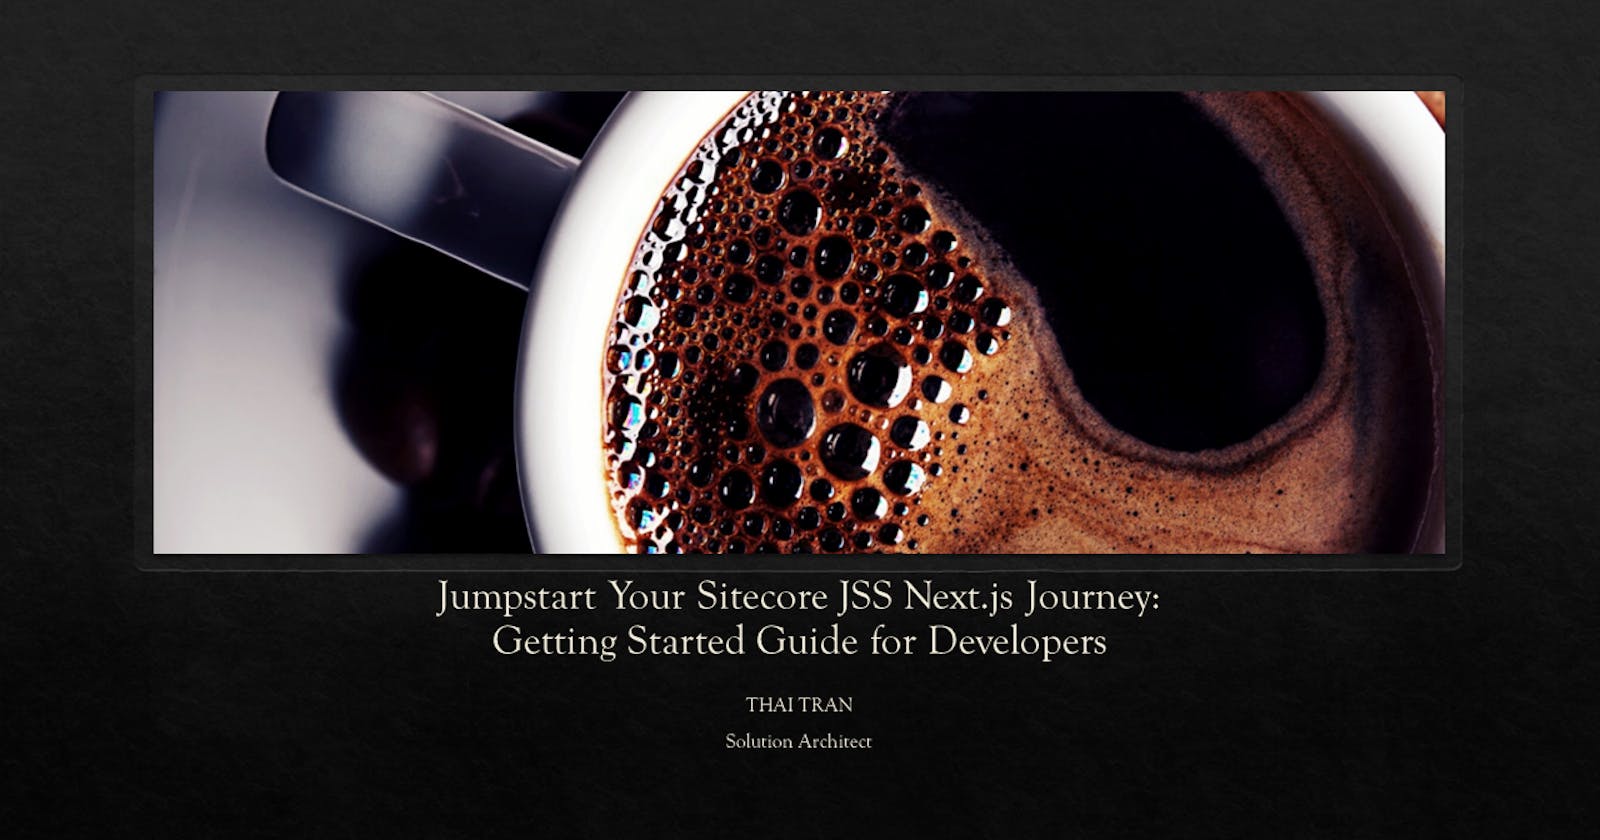 Jumpstart Your Sitecore JSS Next.js Journey: Getting Started Guide for Developers